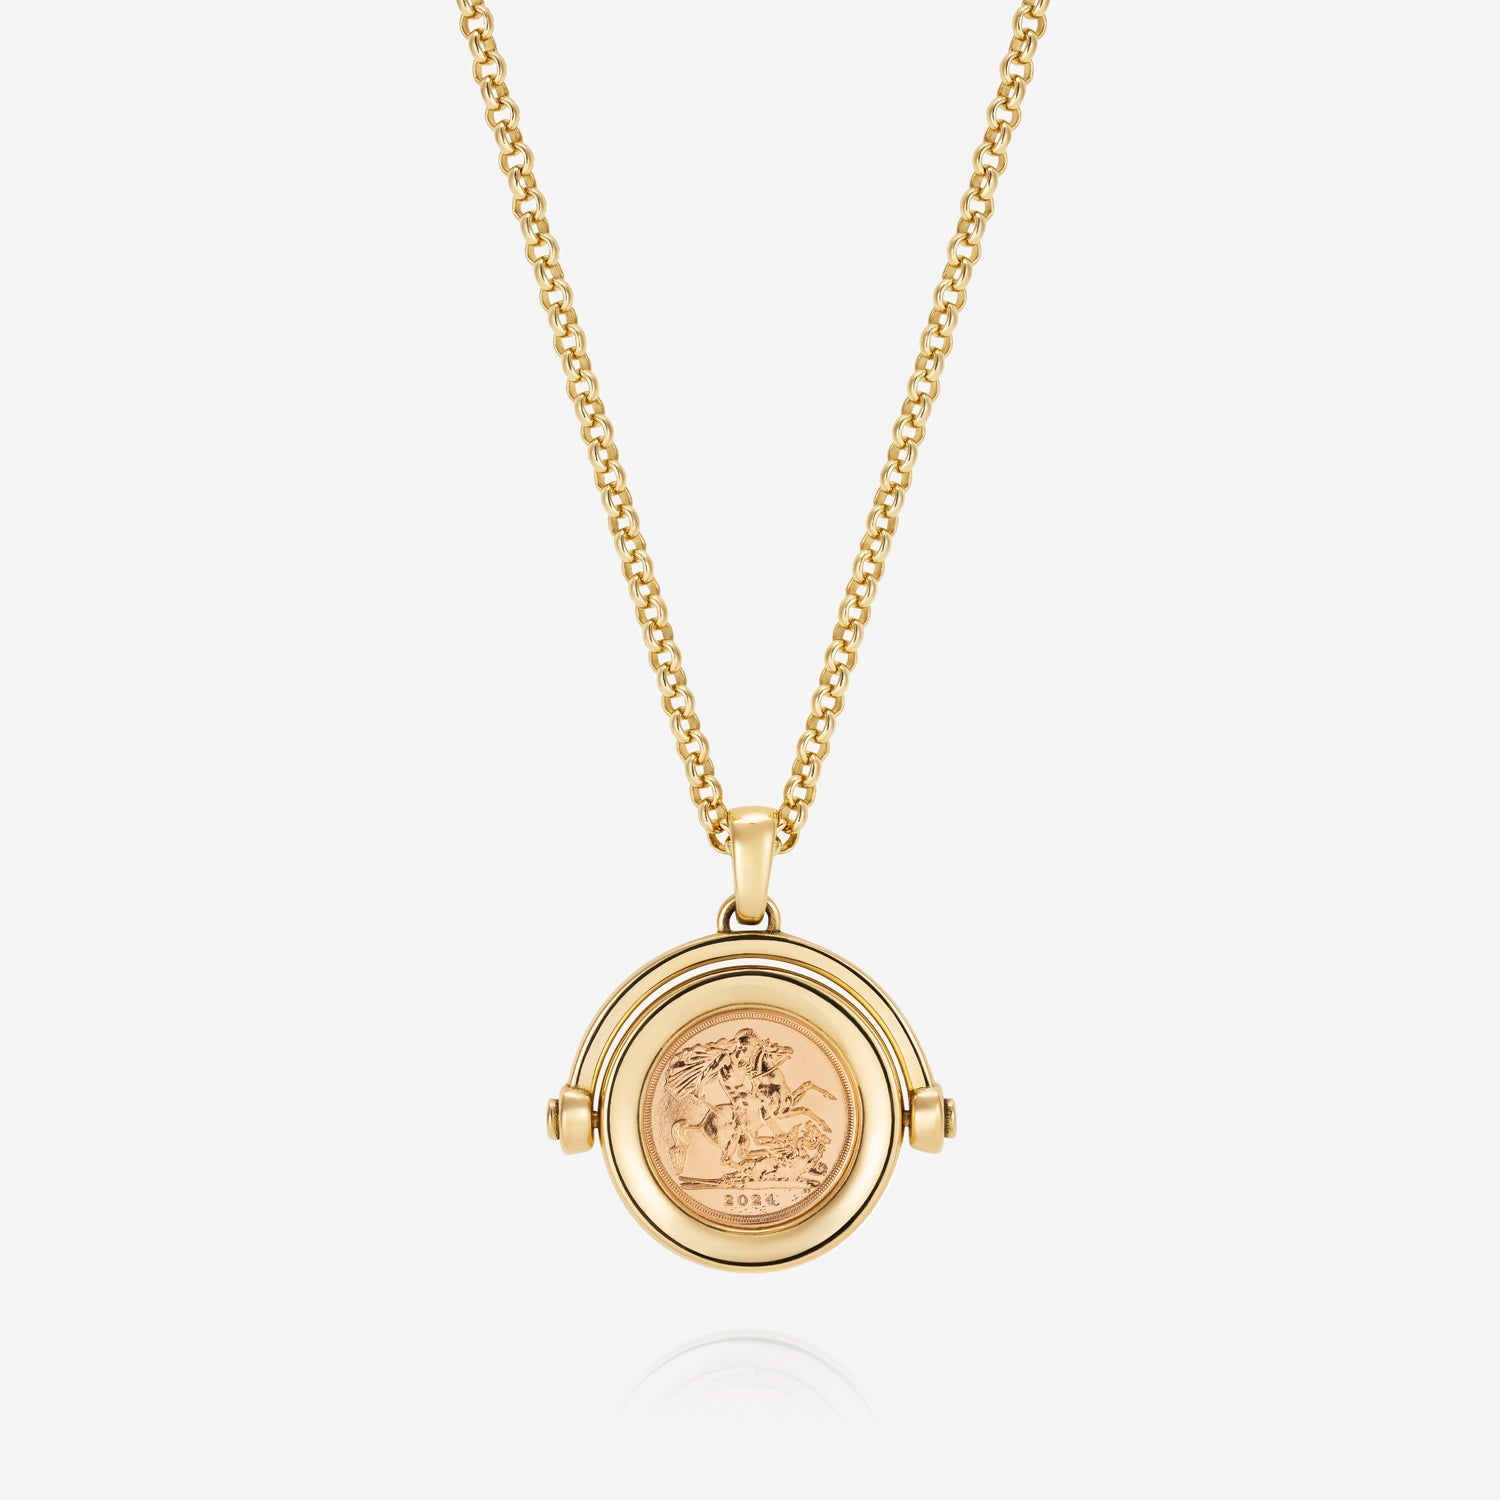 886 Royal Mint Necklaces 886 Quarter Sovereign Spinning Pendant with Chain 18ct Gold